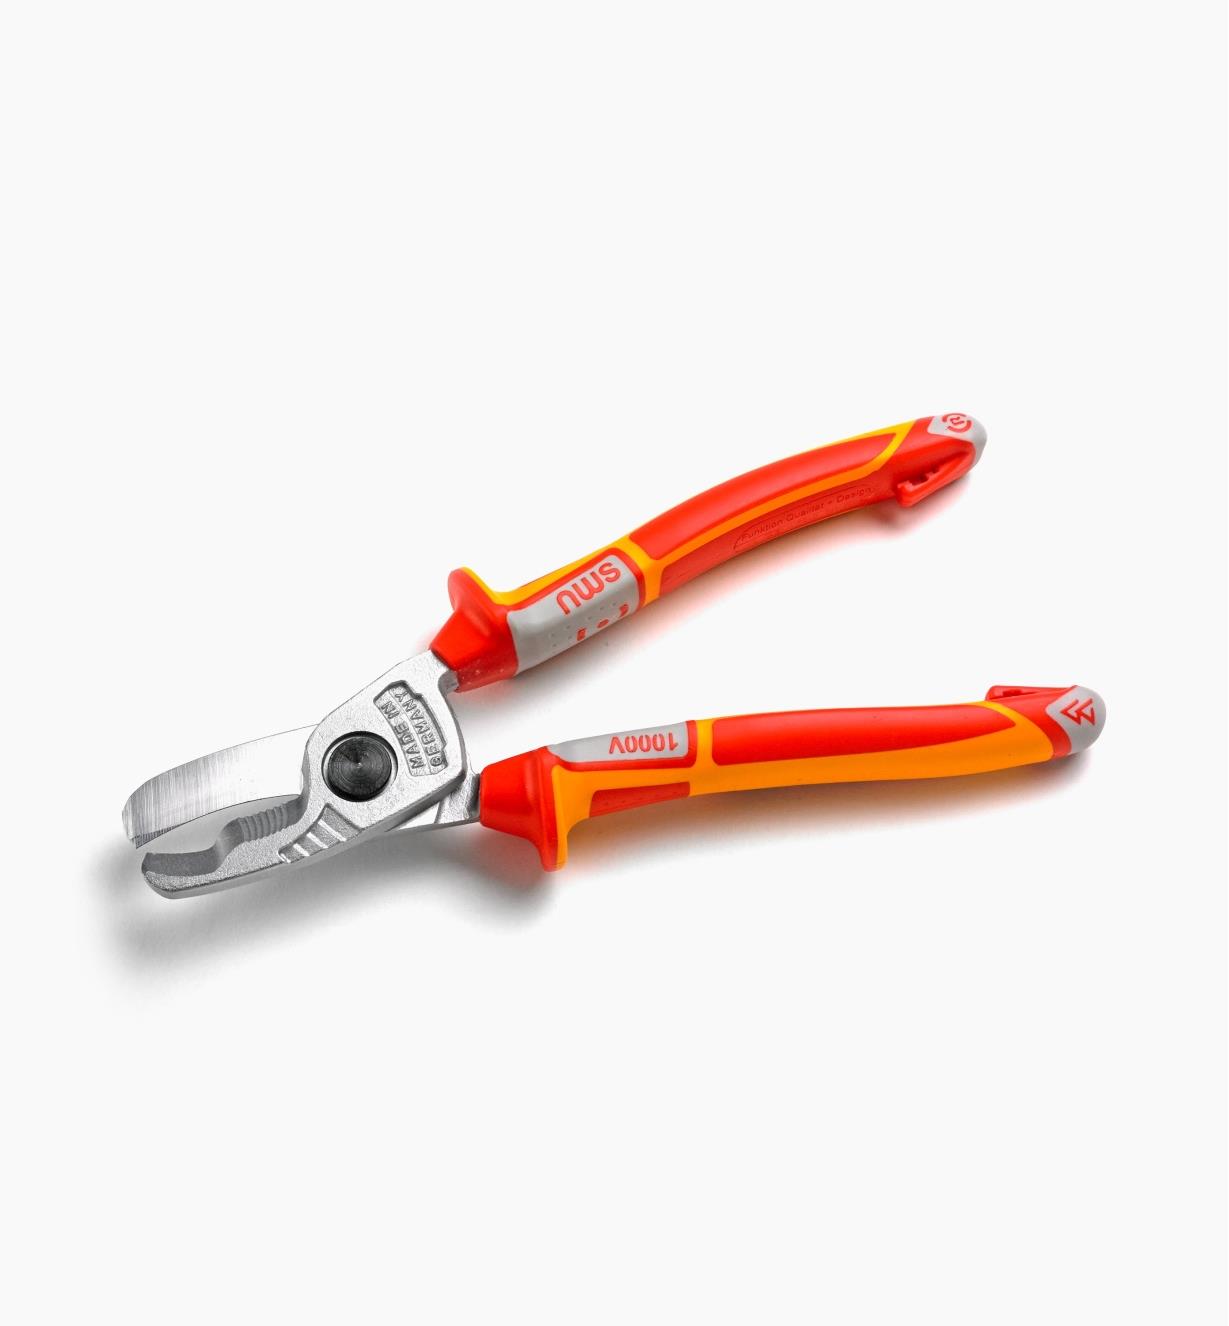 24K2203 - NWS Insulated (1000V) Cable Cutters